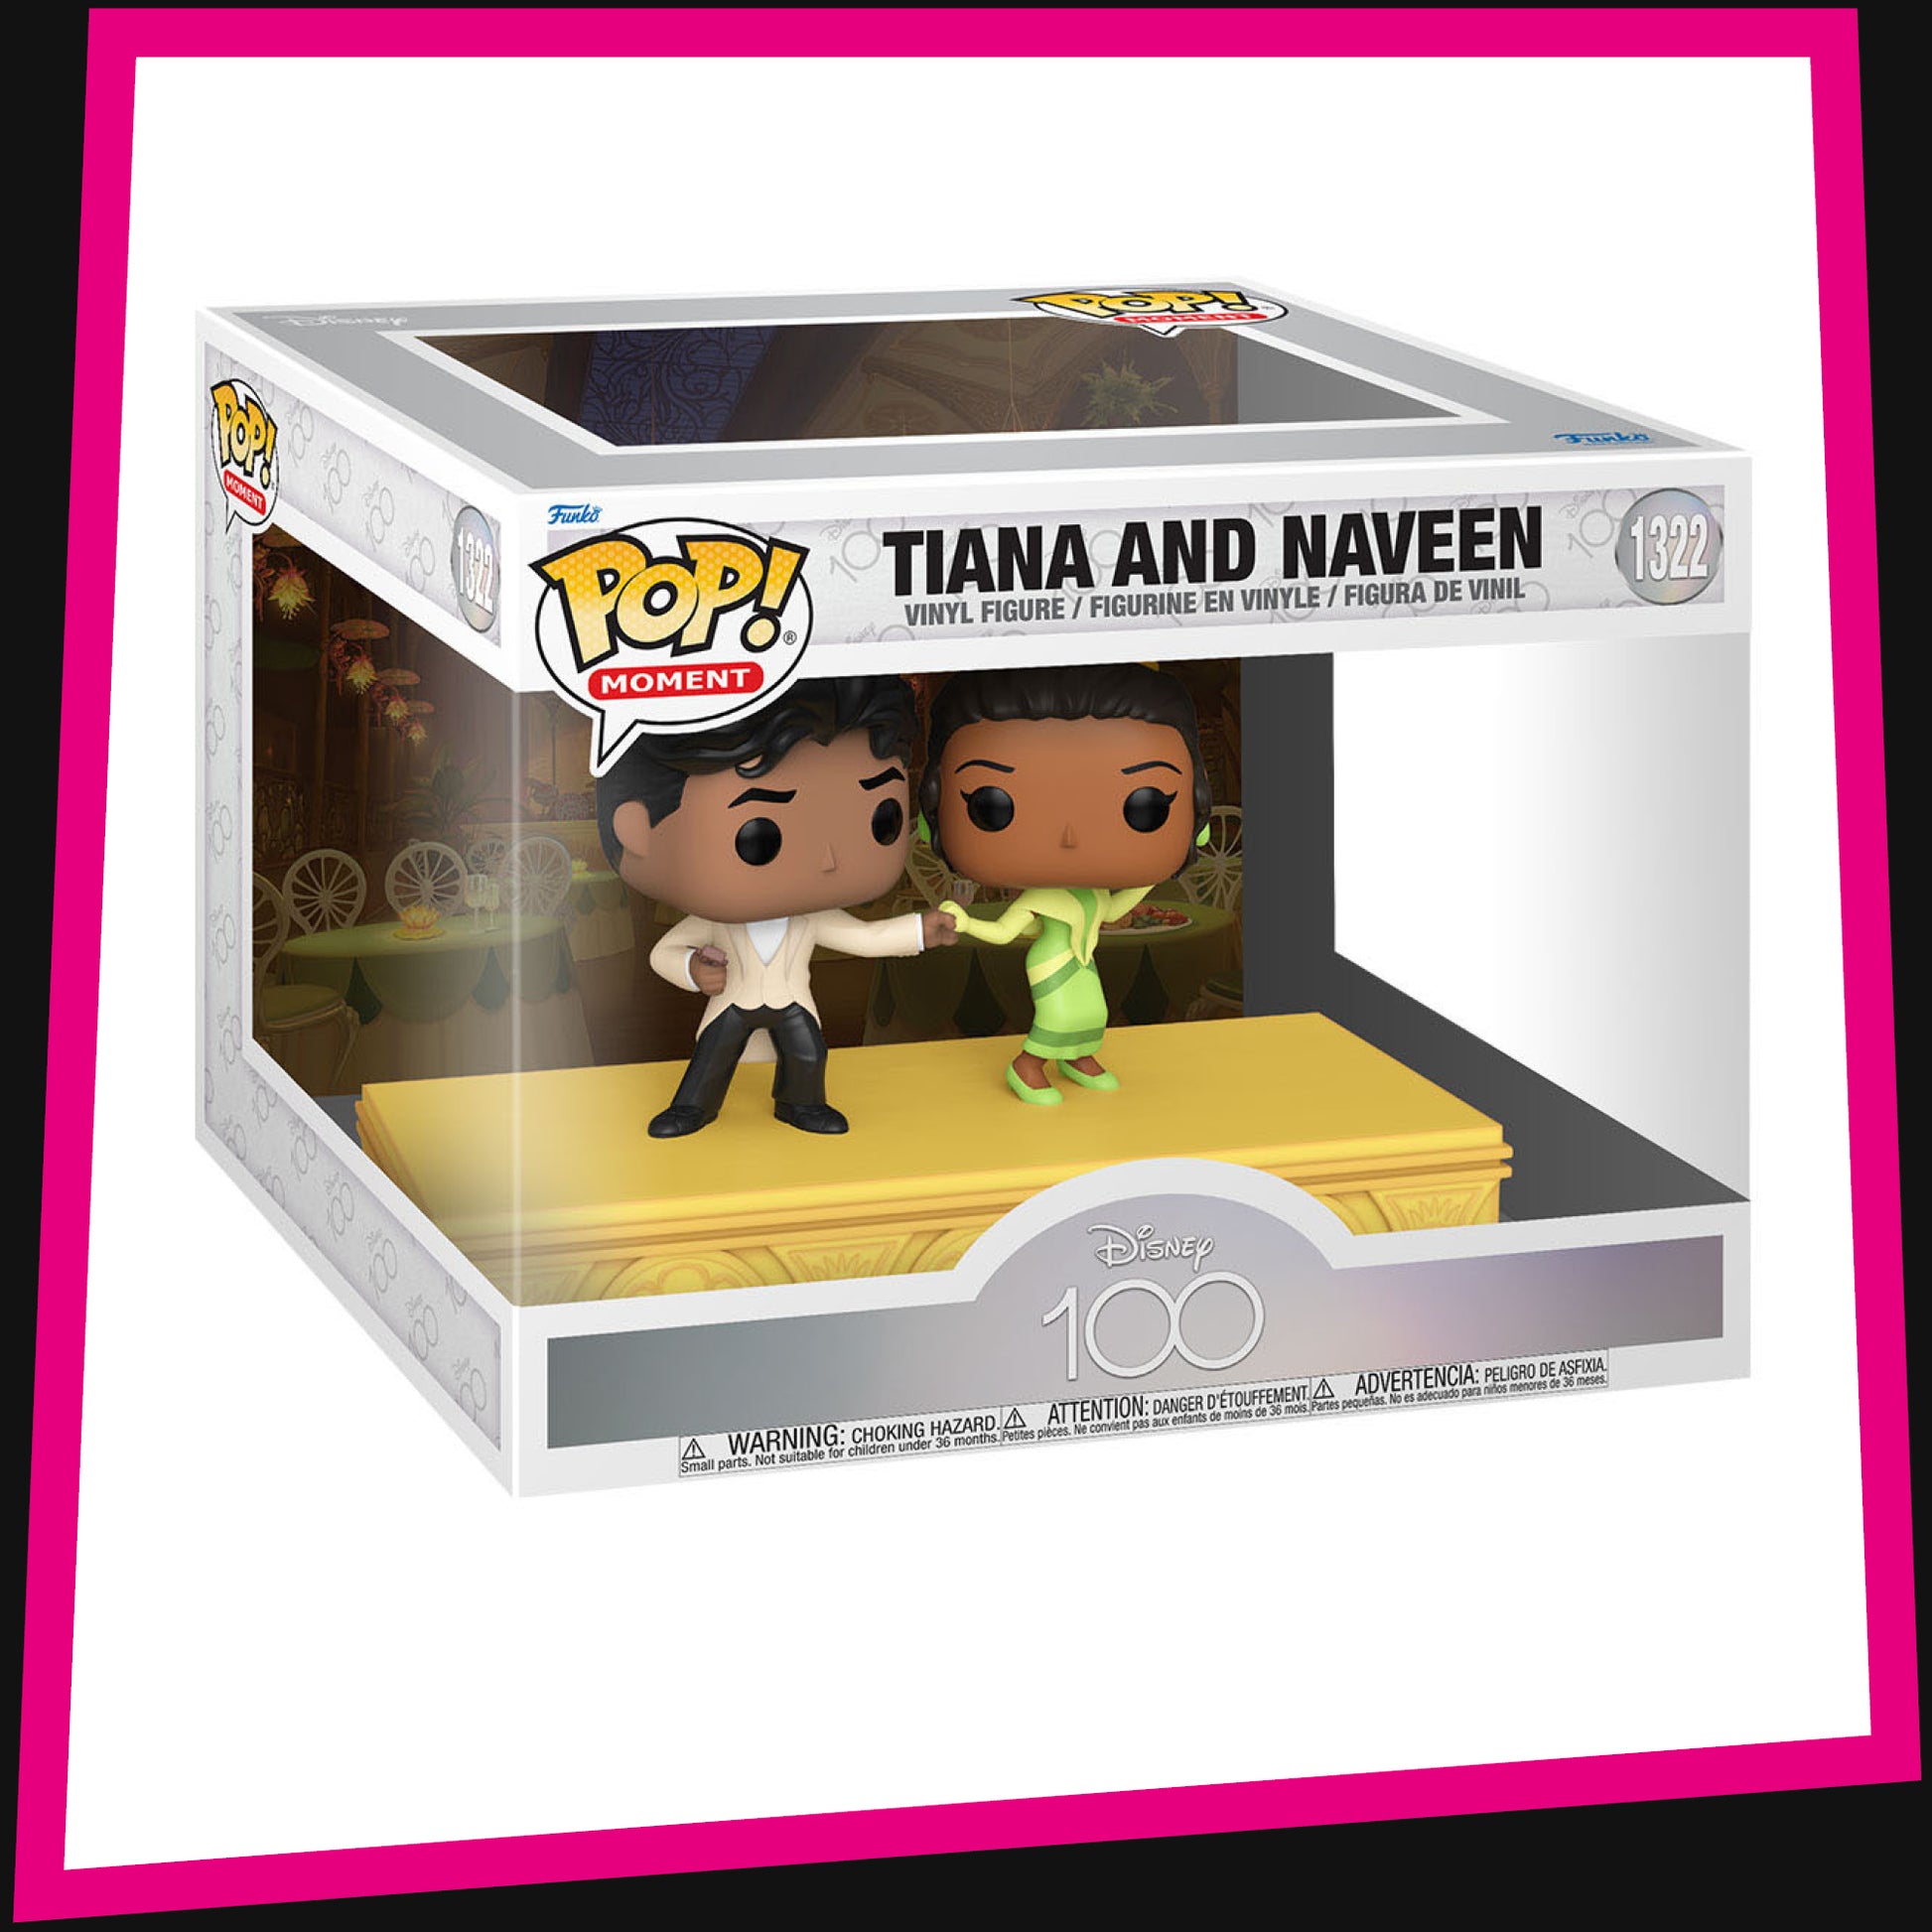 Tiana and Naveen Momen Disney Pre-Owned New #1322 Toys - Barn & Toy POP! Collectibles Vinyl and 100 Derek\'s Anniversary Funko – 